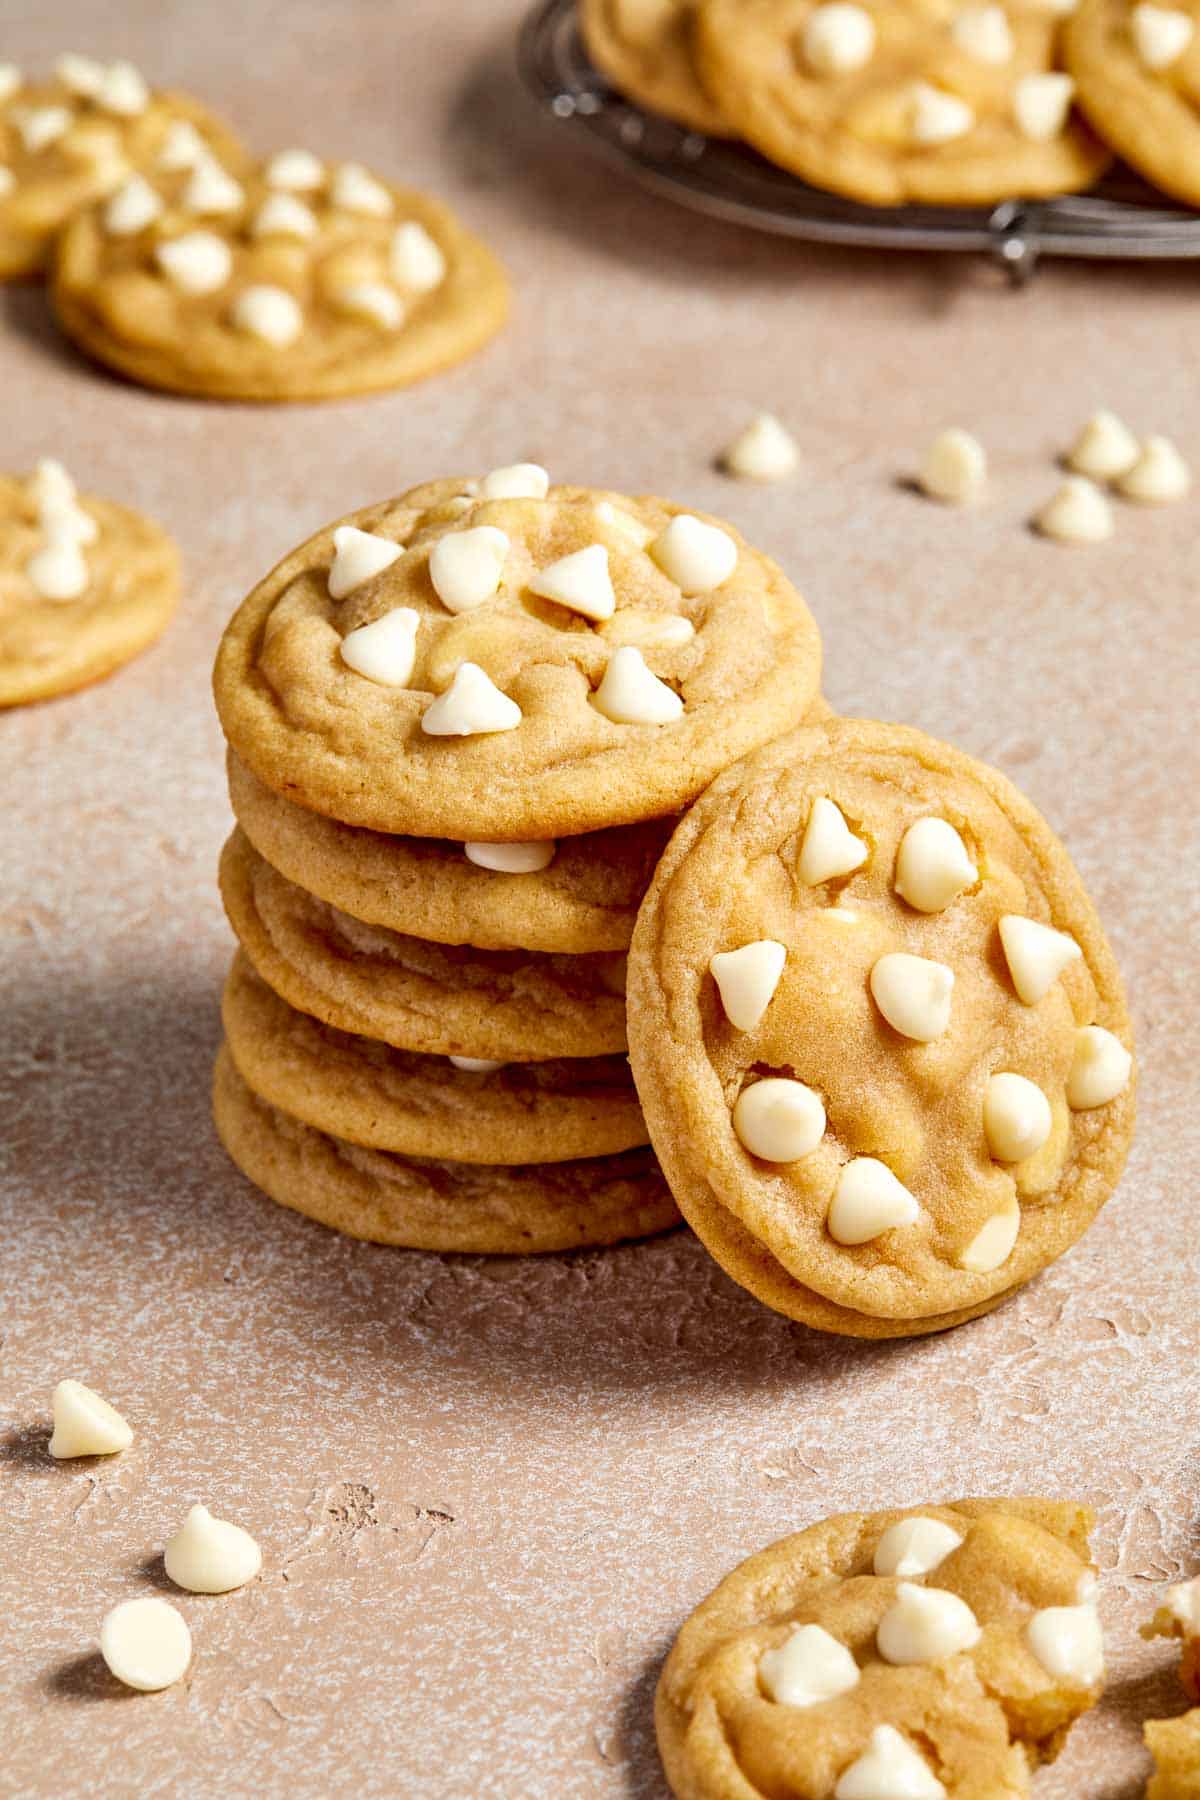 White Chocolate Chip Cookies are soft and chewy with golden crisp edges, and loaded with white chocolate chips. Ready in under 20 minutes with no chilling! | aheadofthyme.com